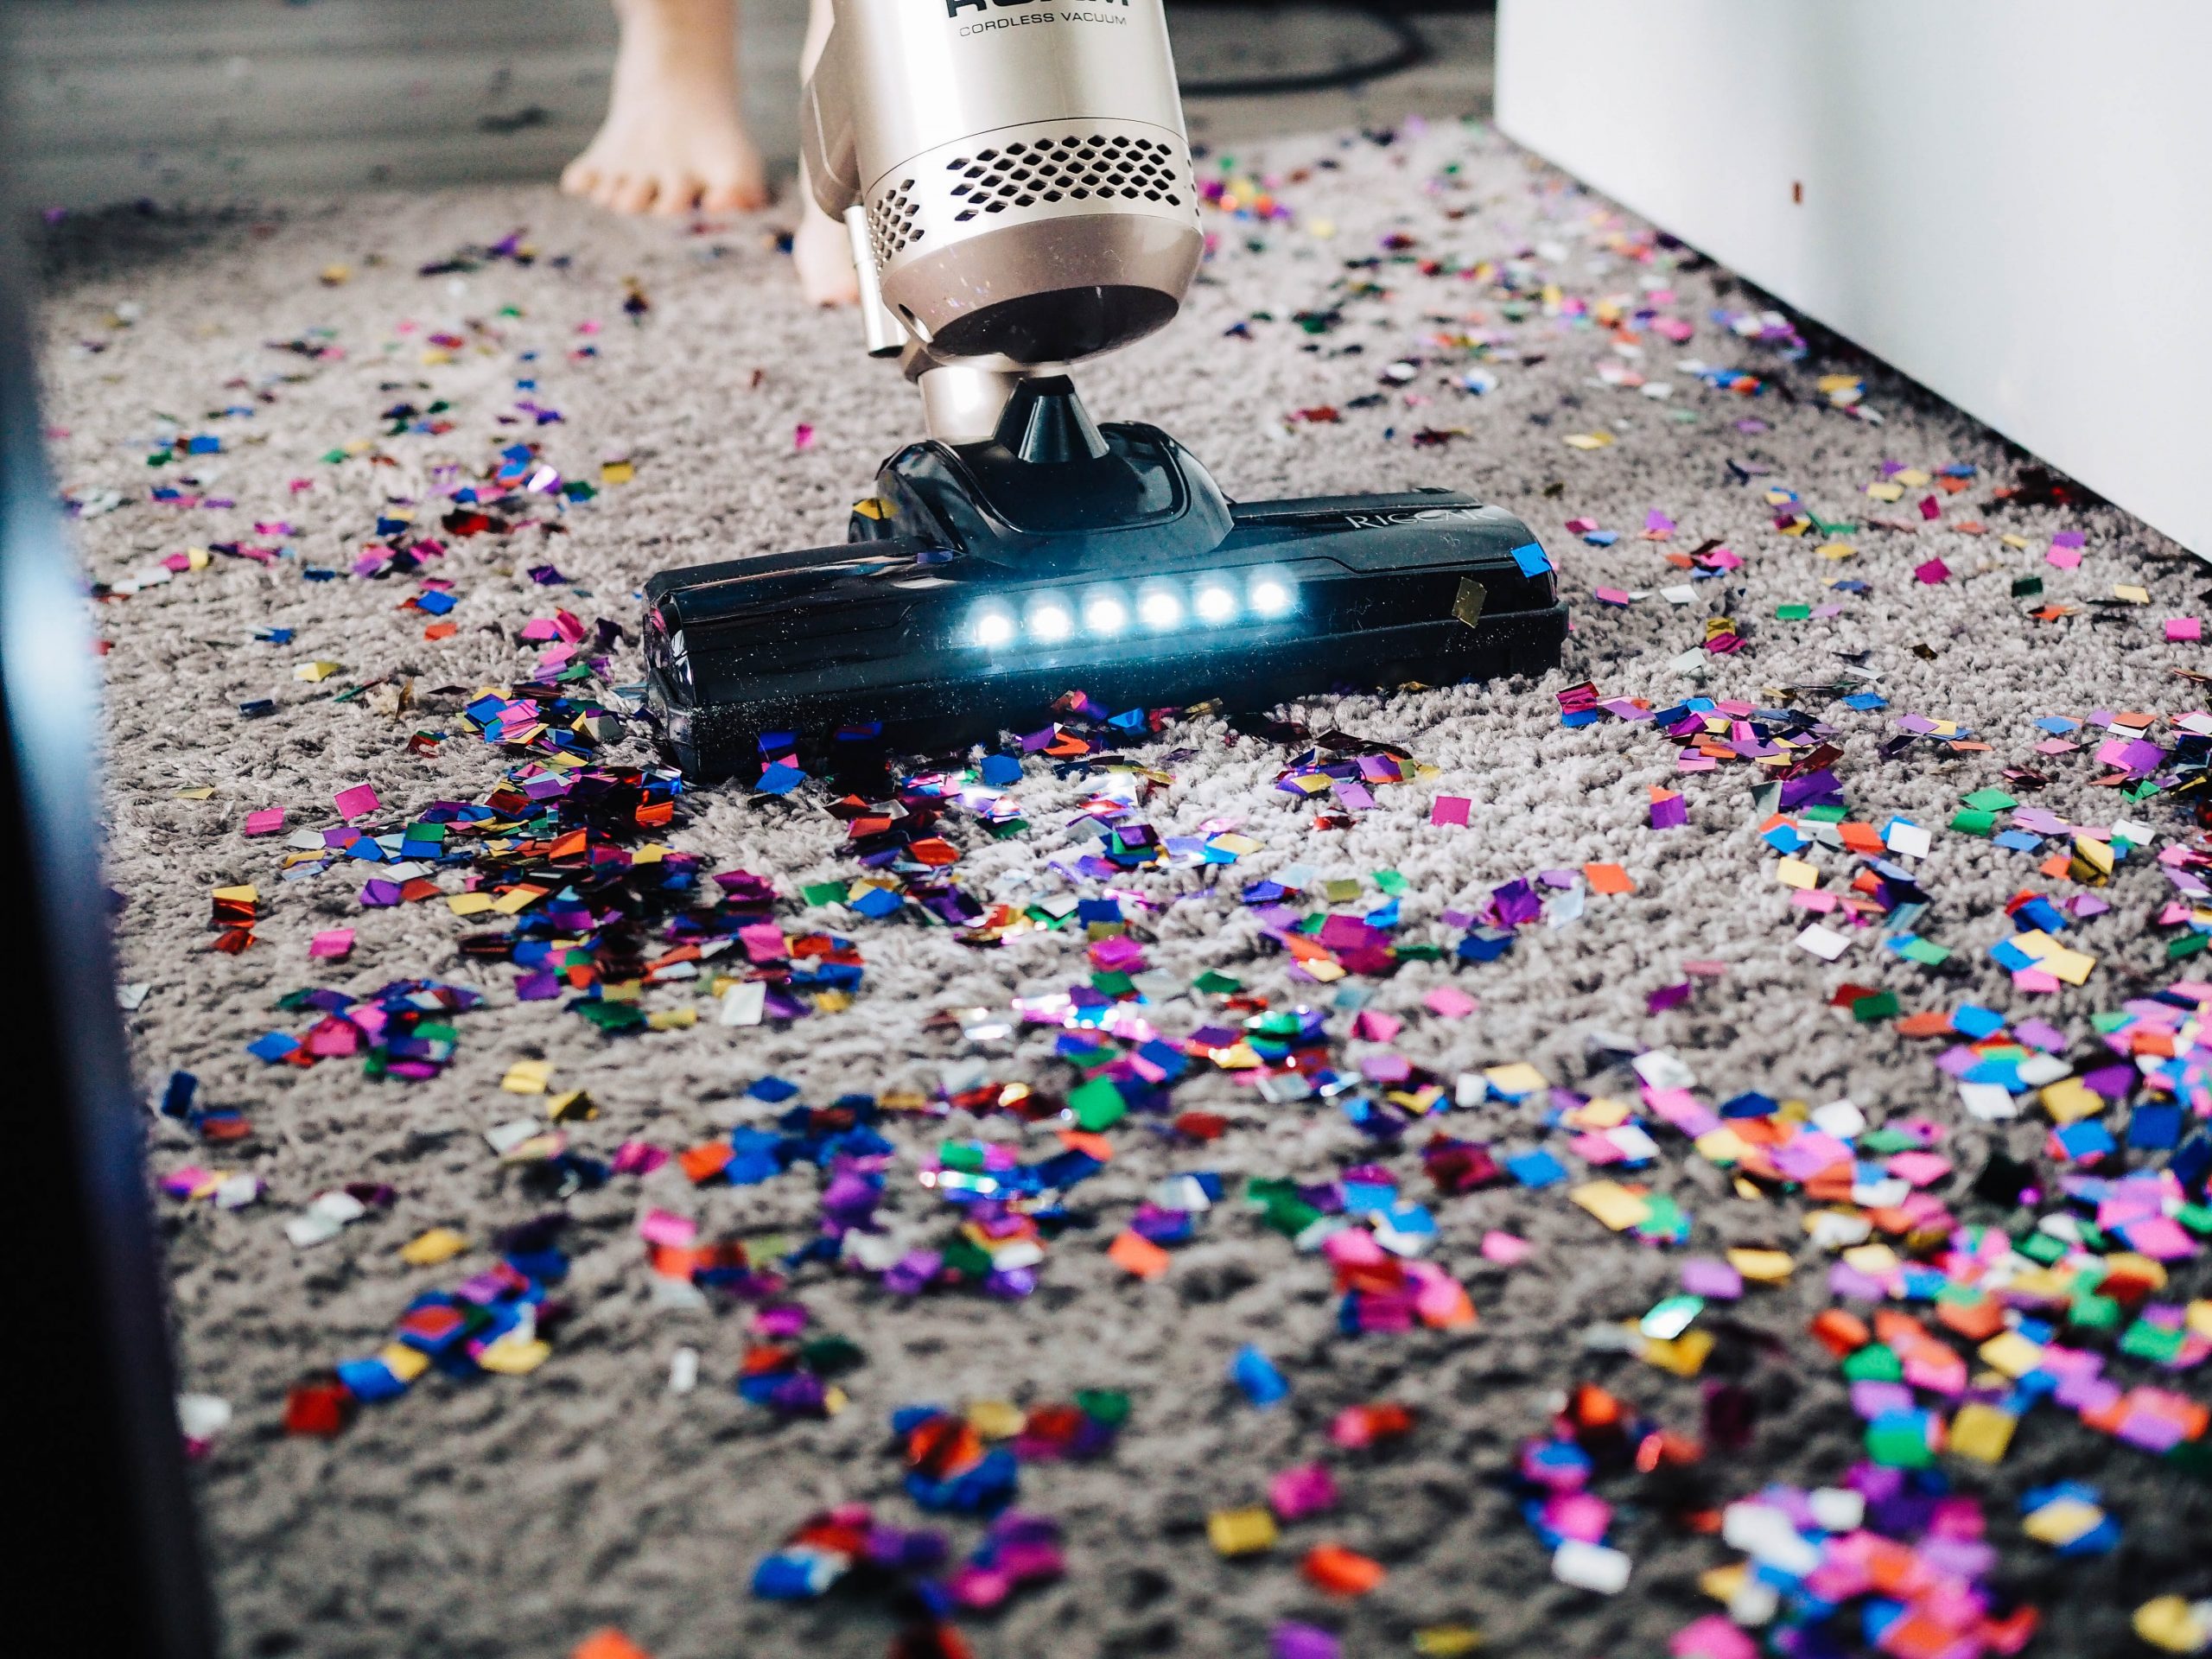 Glitter spread all over the floor with a vacumme